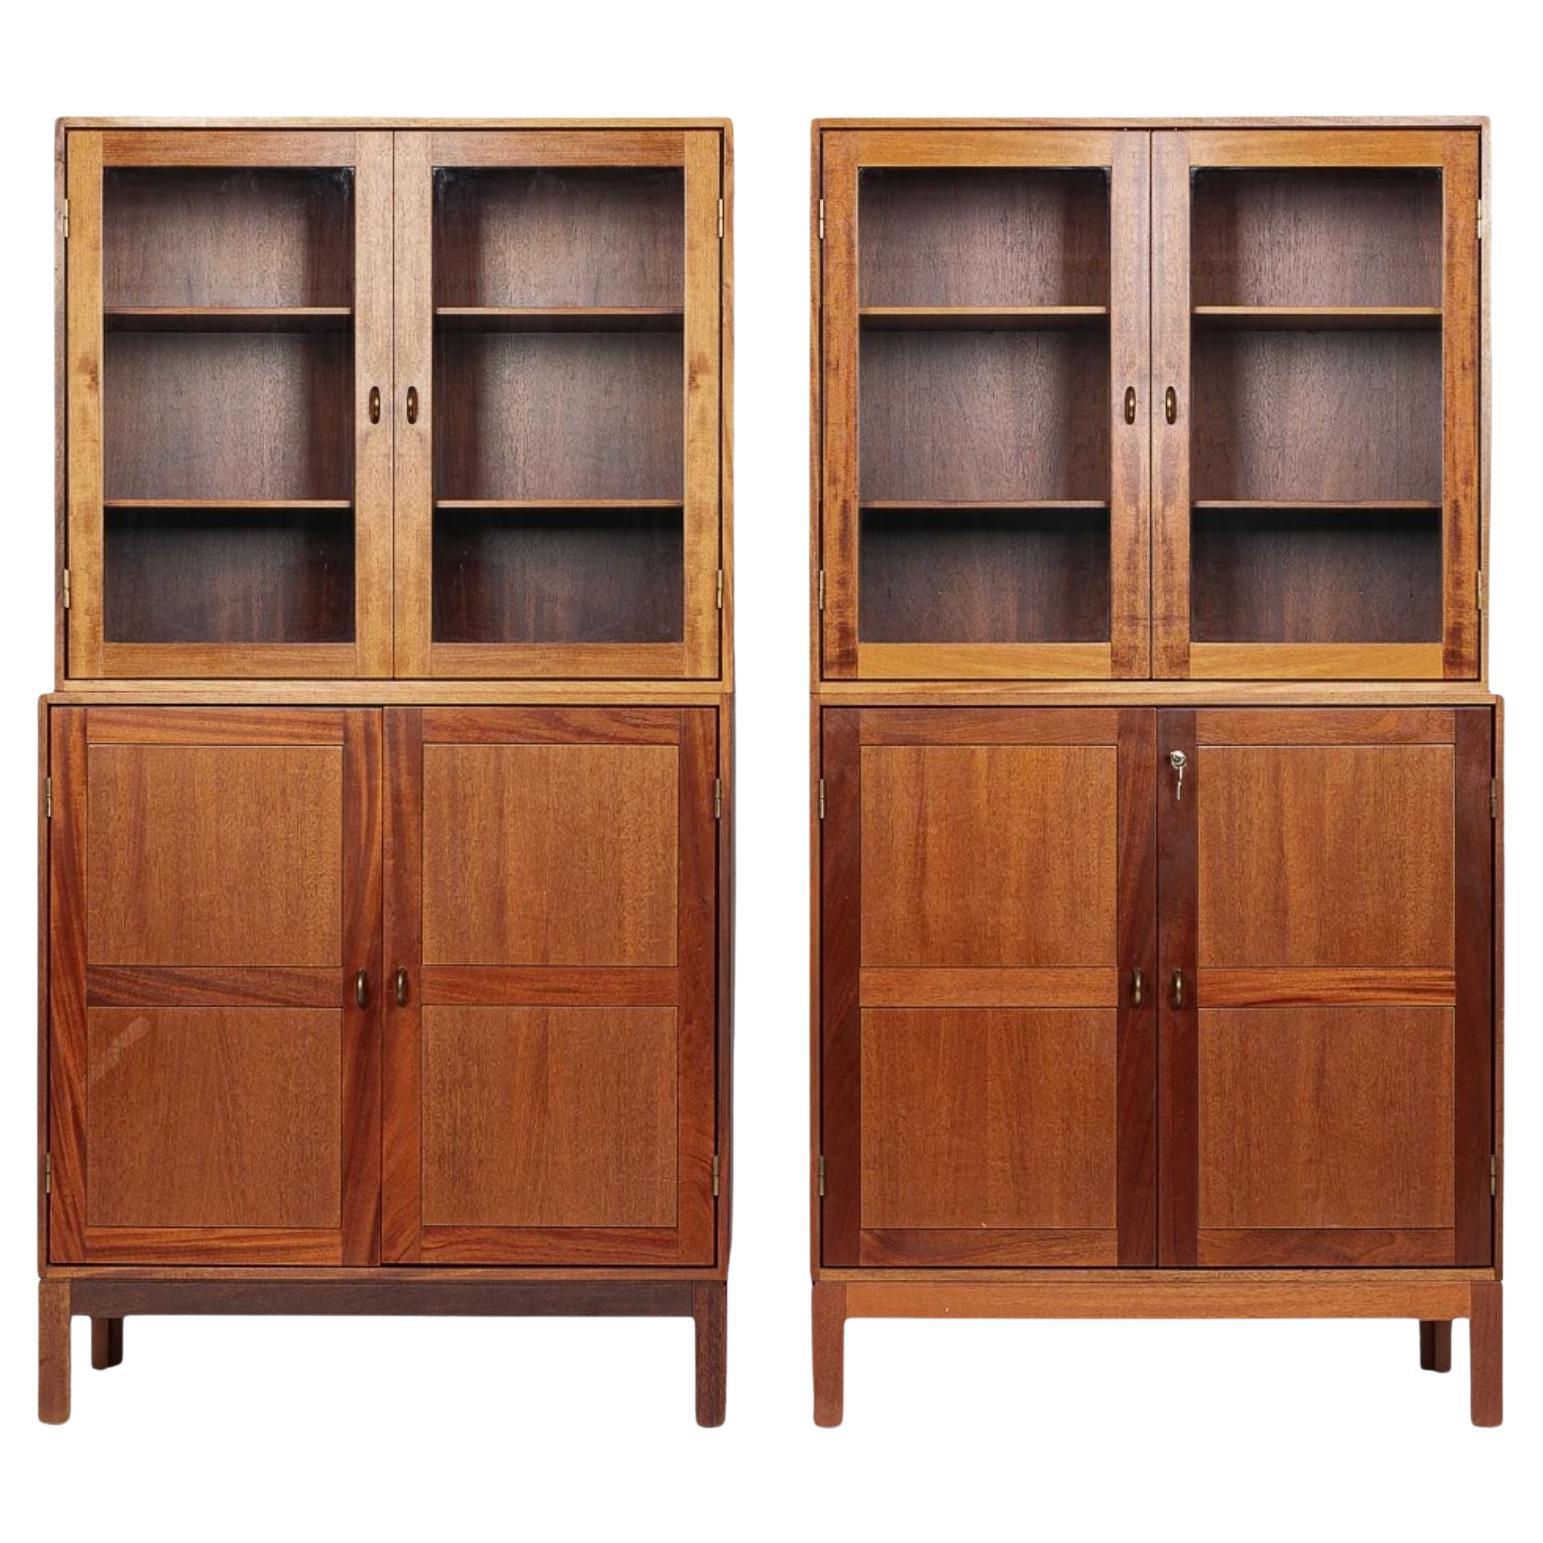 https://a.1stdibscdn.com/mid-century-danish-wood-storage-cabinets-with-glass-doors-file-drawer-for-sale/22569652/f_330388321677645676420/f_33038832_1677645677024_bg_processed.jpg